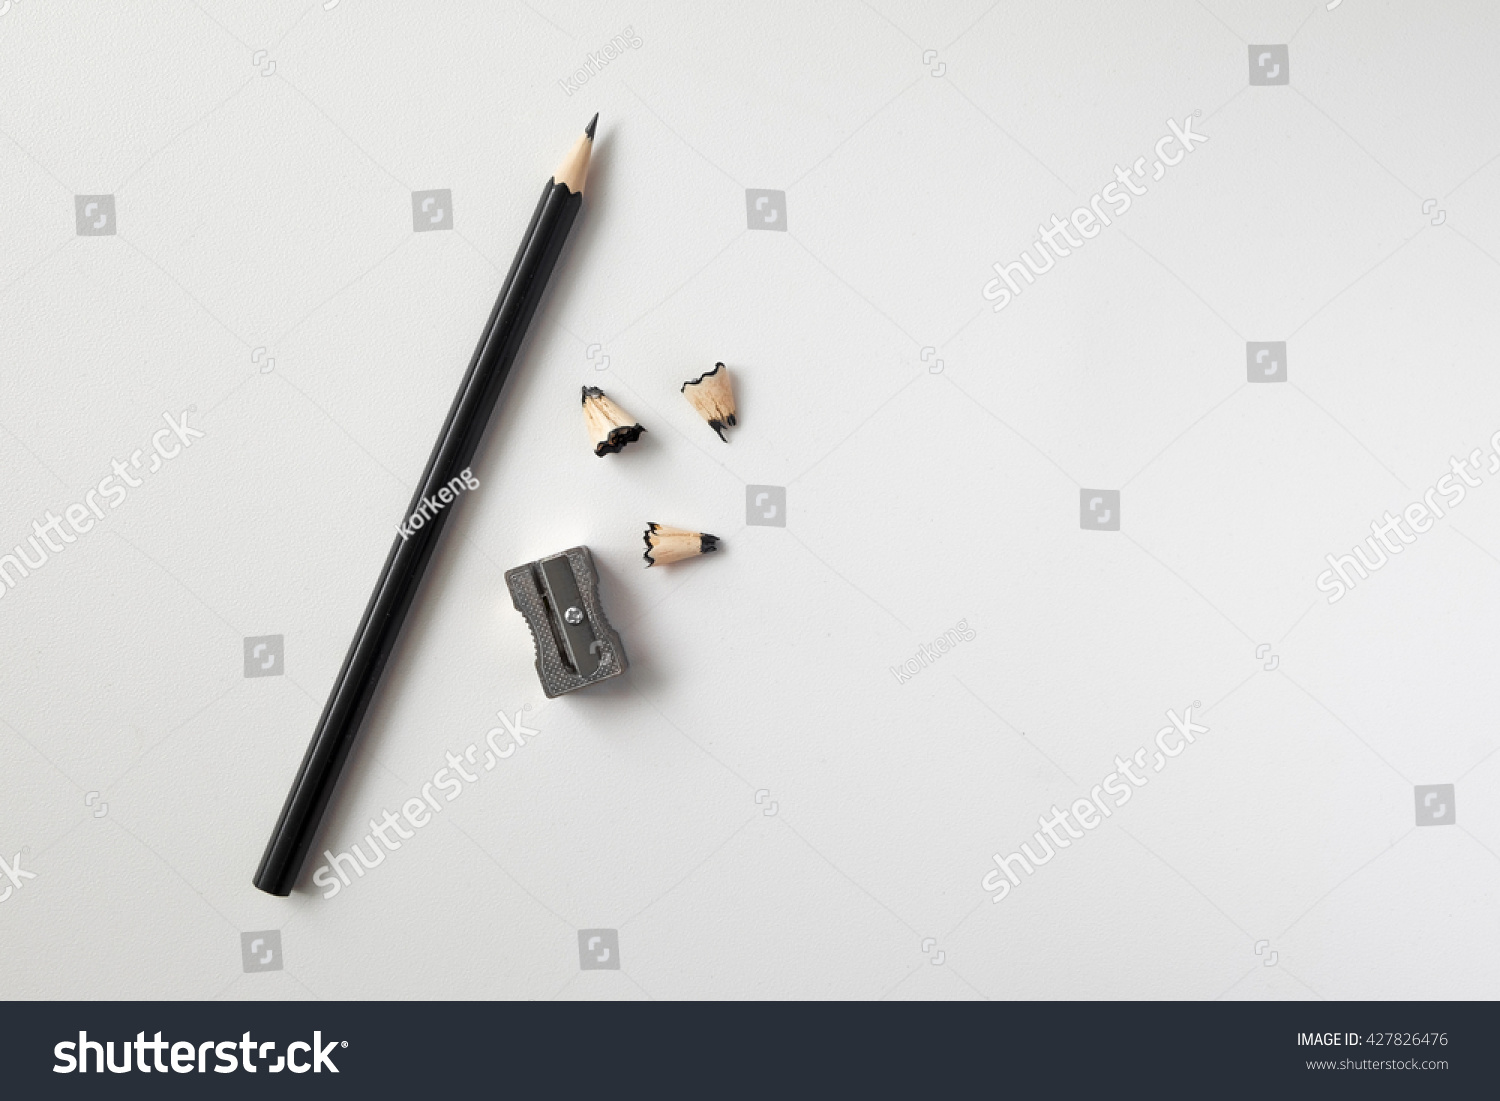 Pencil with sharpening shavings on white background #427826476